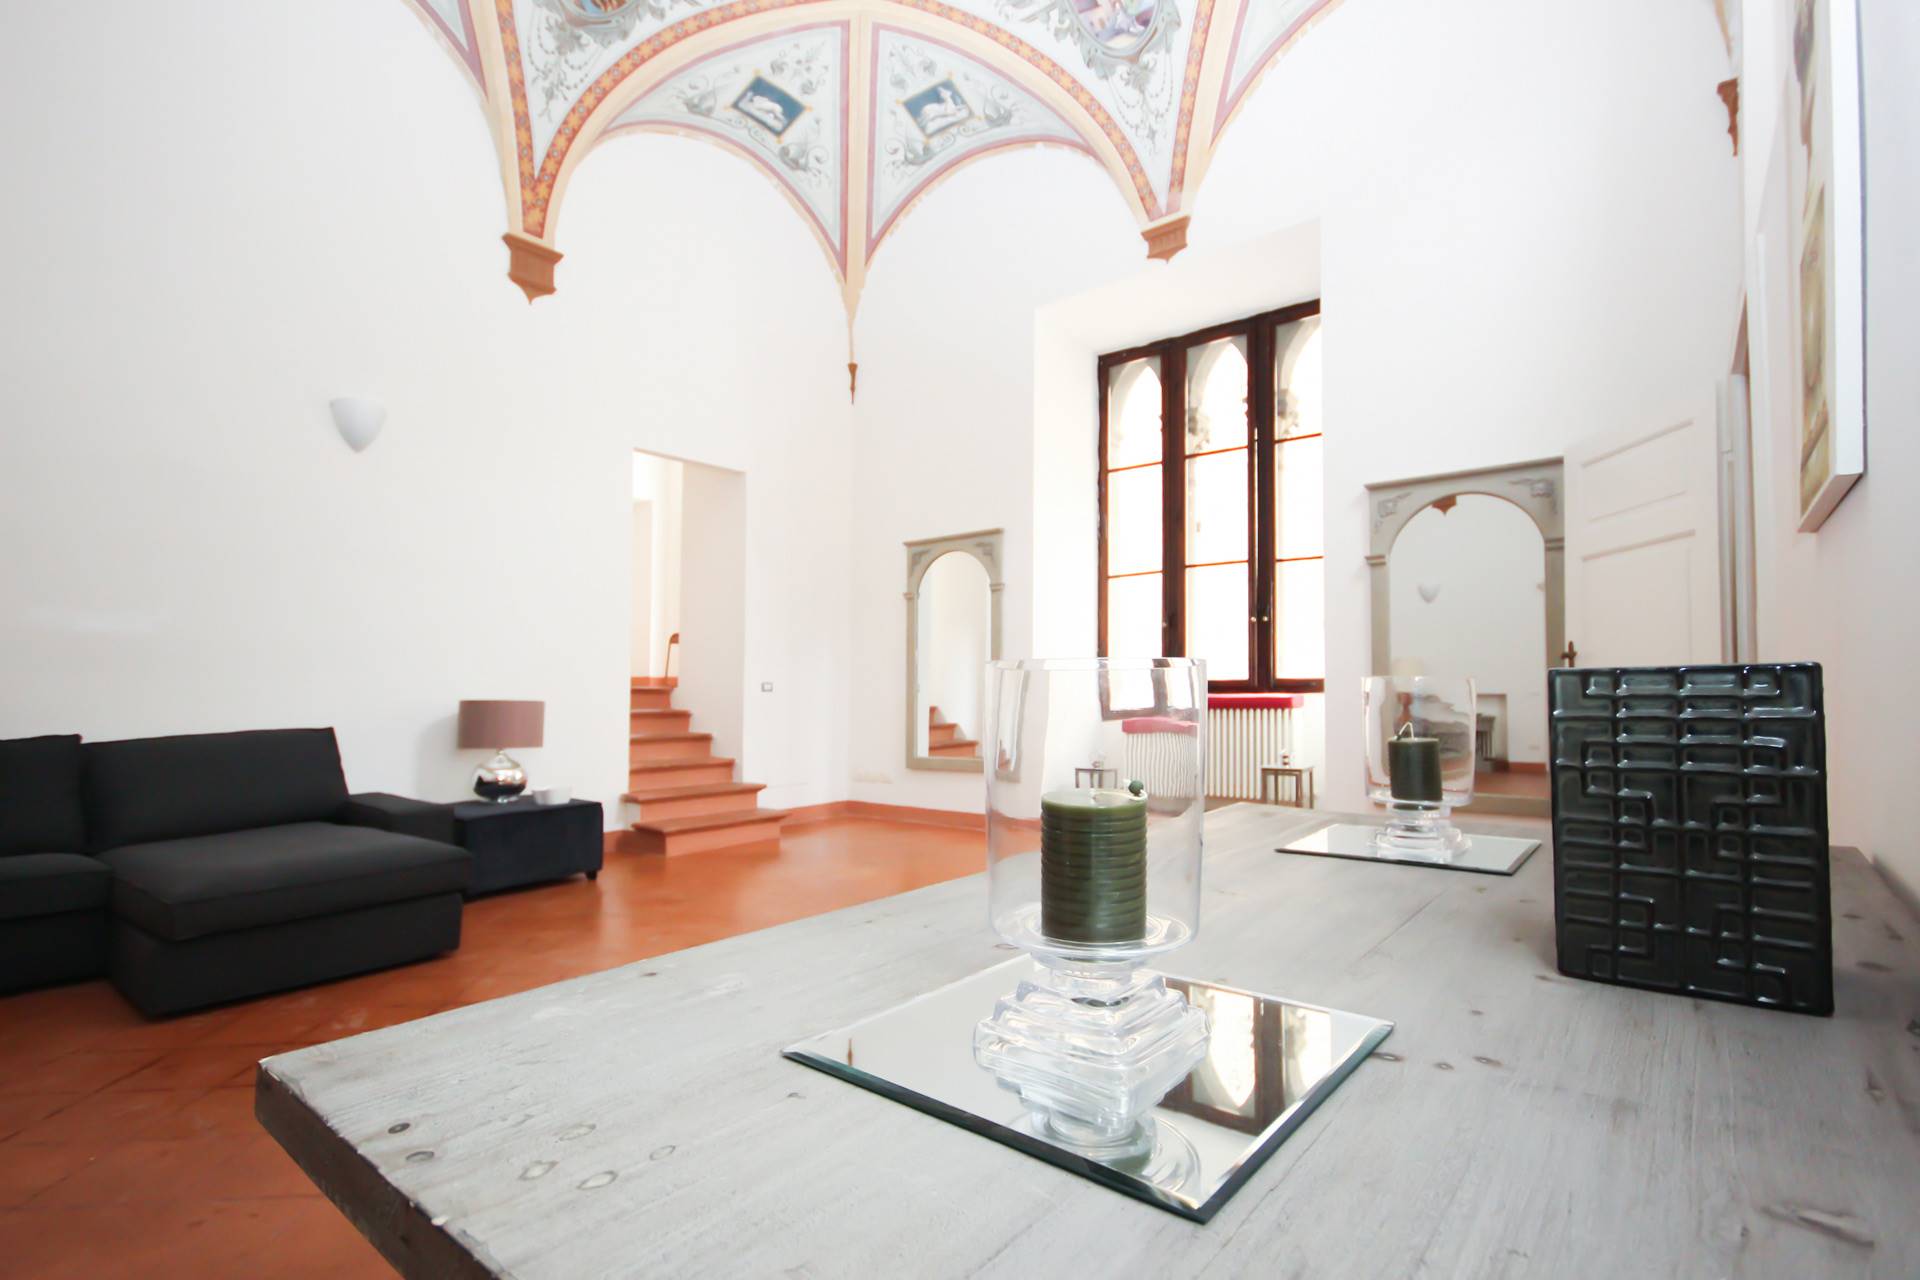 Prestigious apartment located in a historic building in one of the most popular streets. The apartment is located on the second floor served 